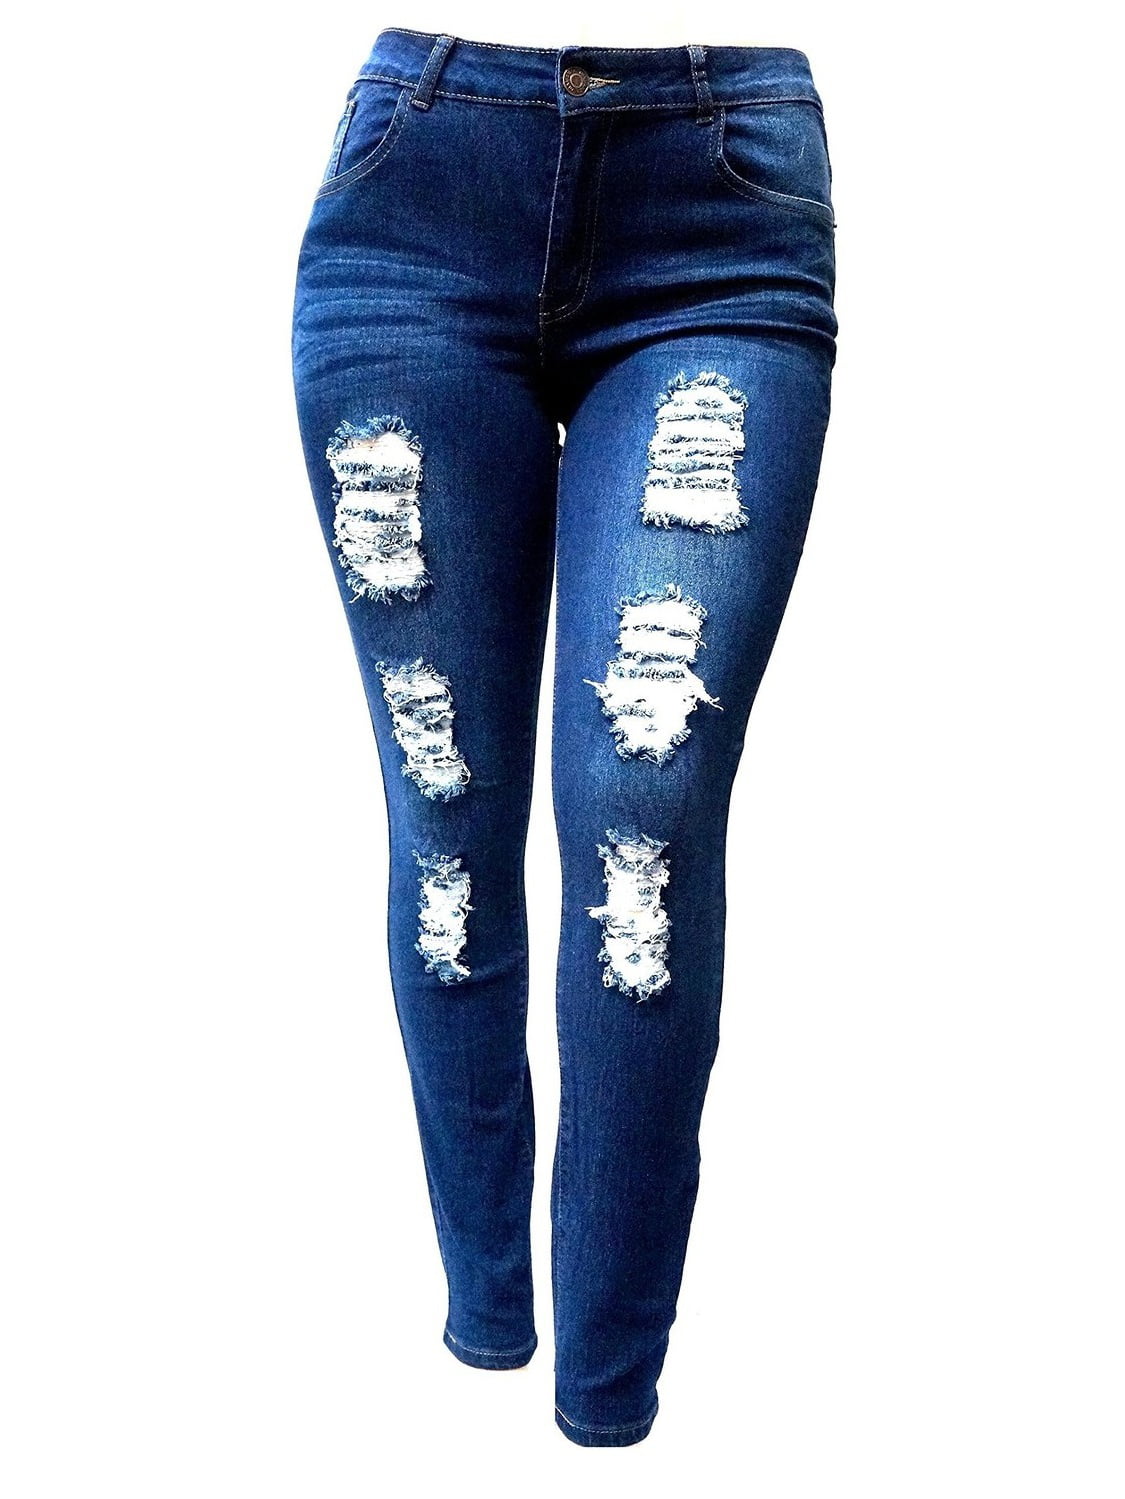 Women Jeans High Waist Plus Jeans for Women Stretch Distressed Ripped Skinny Denim Stretch Slim Length Jeans Pants